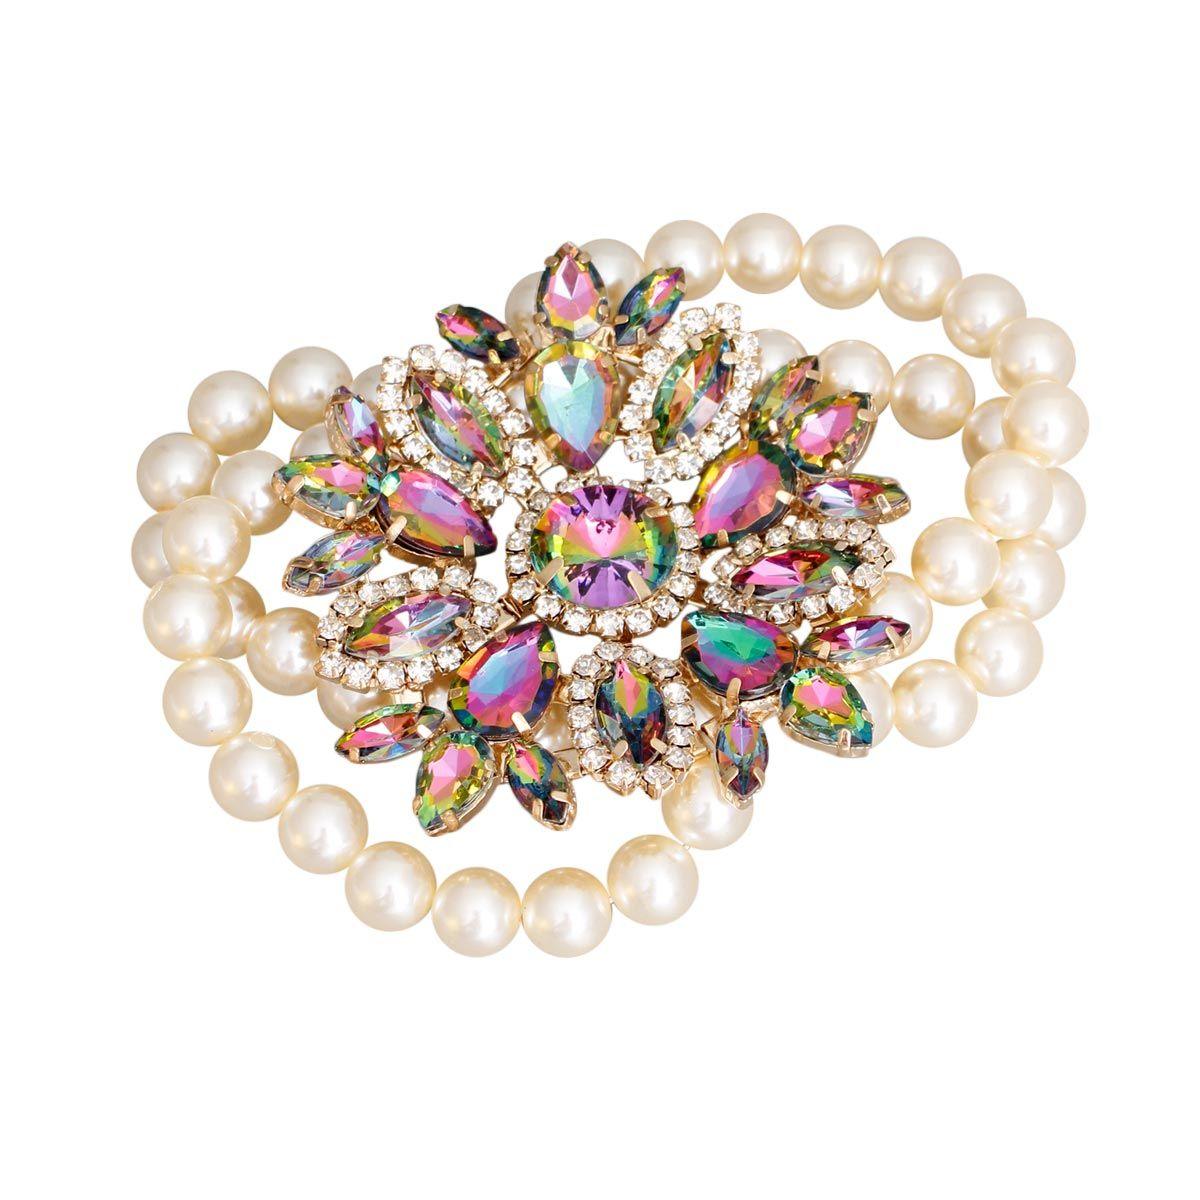 Fashion Jewelry: Unleash Your Inner Sparkle with our Grande Bracelet